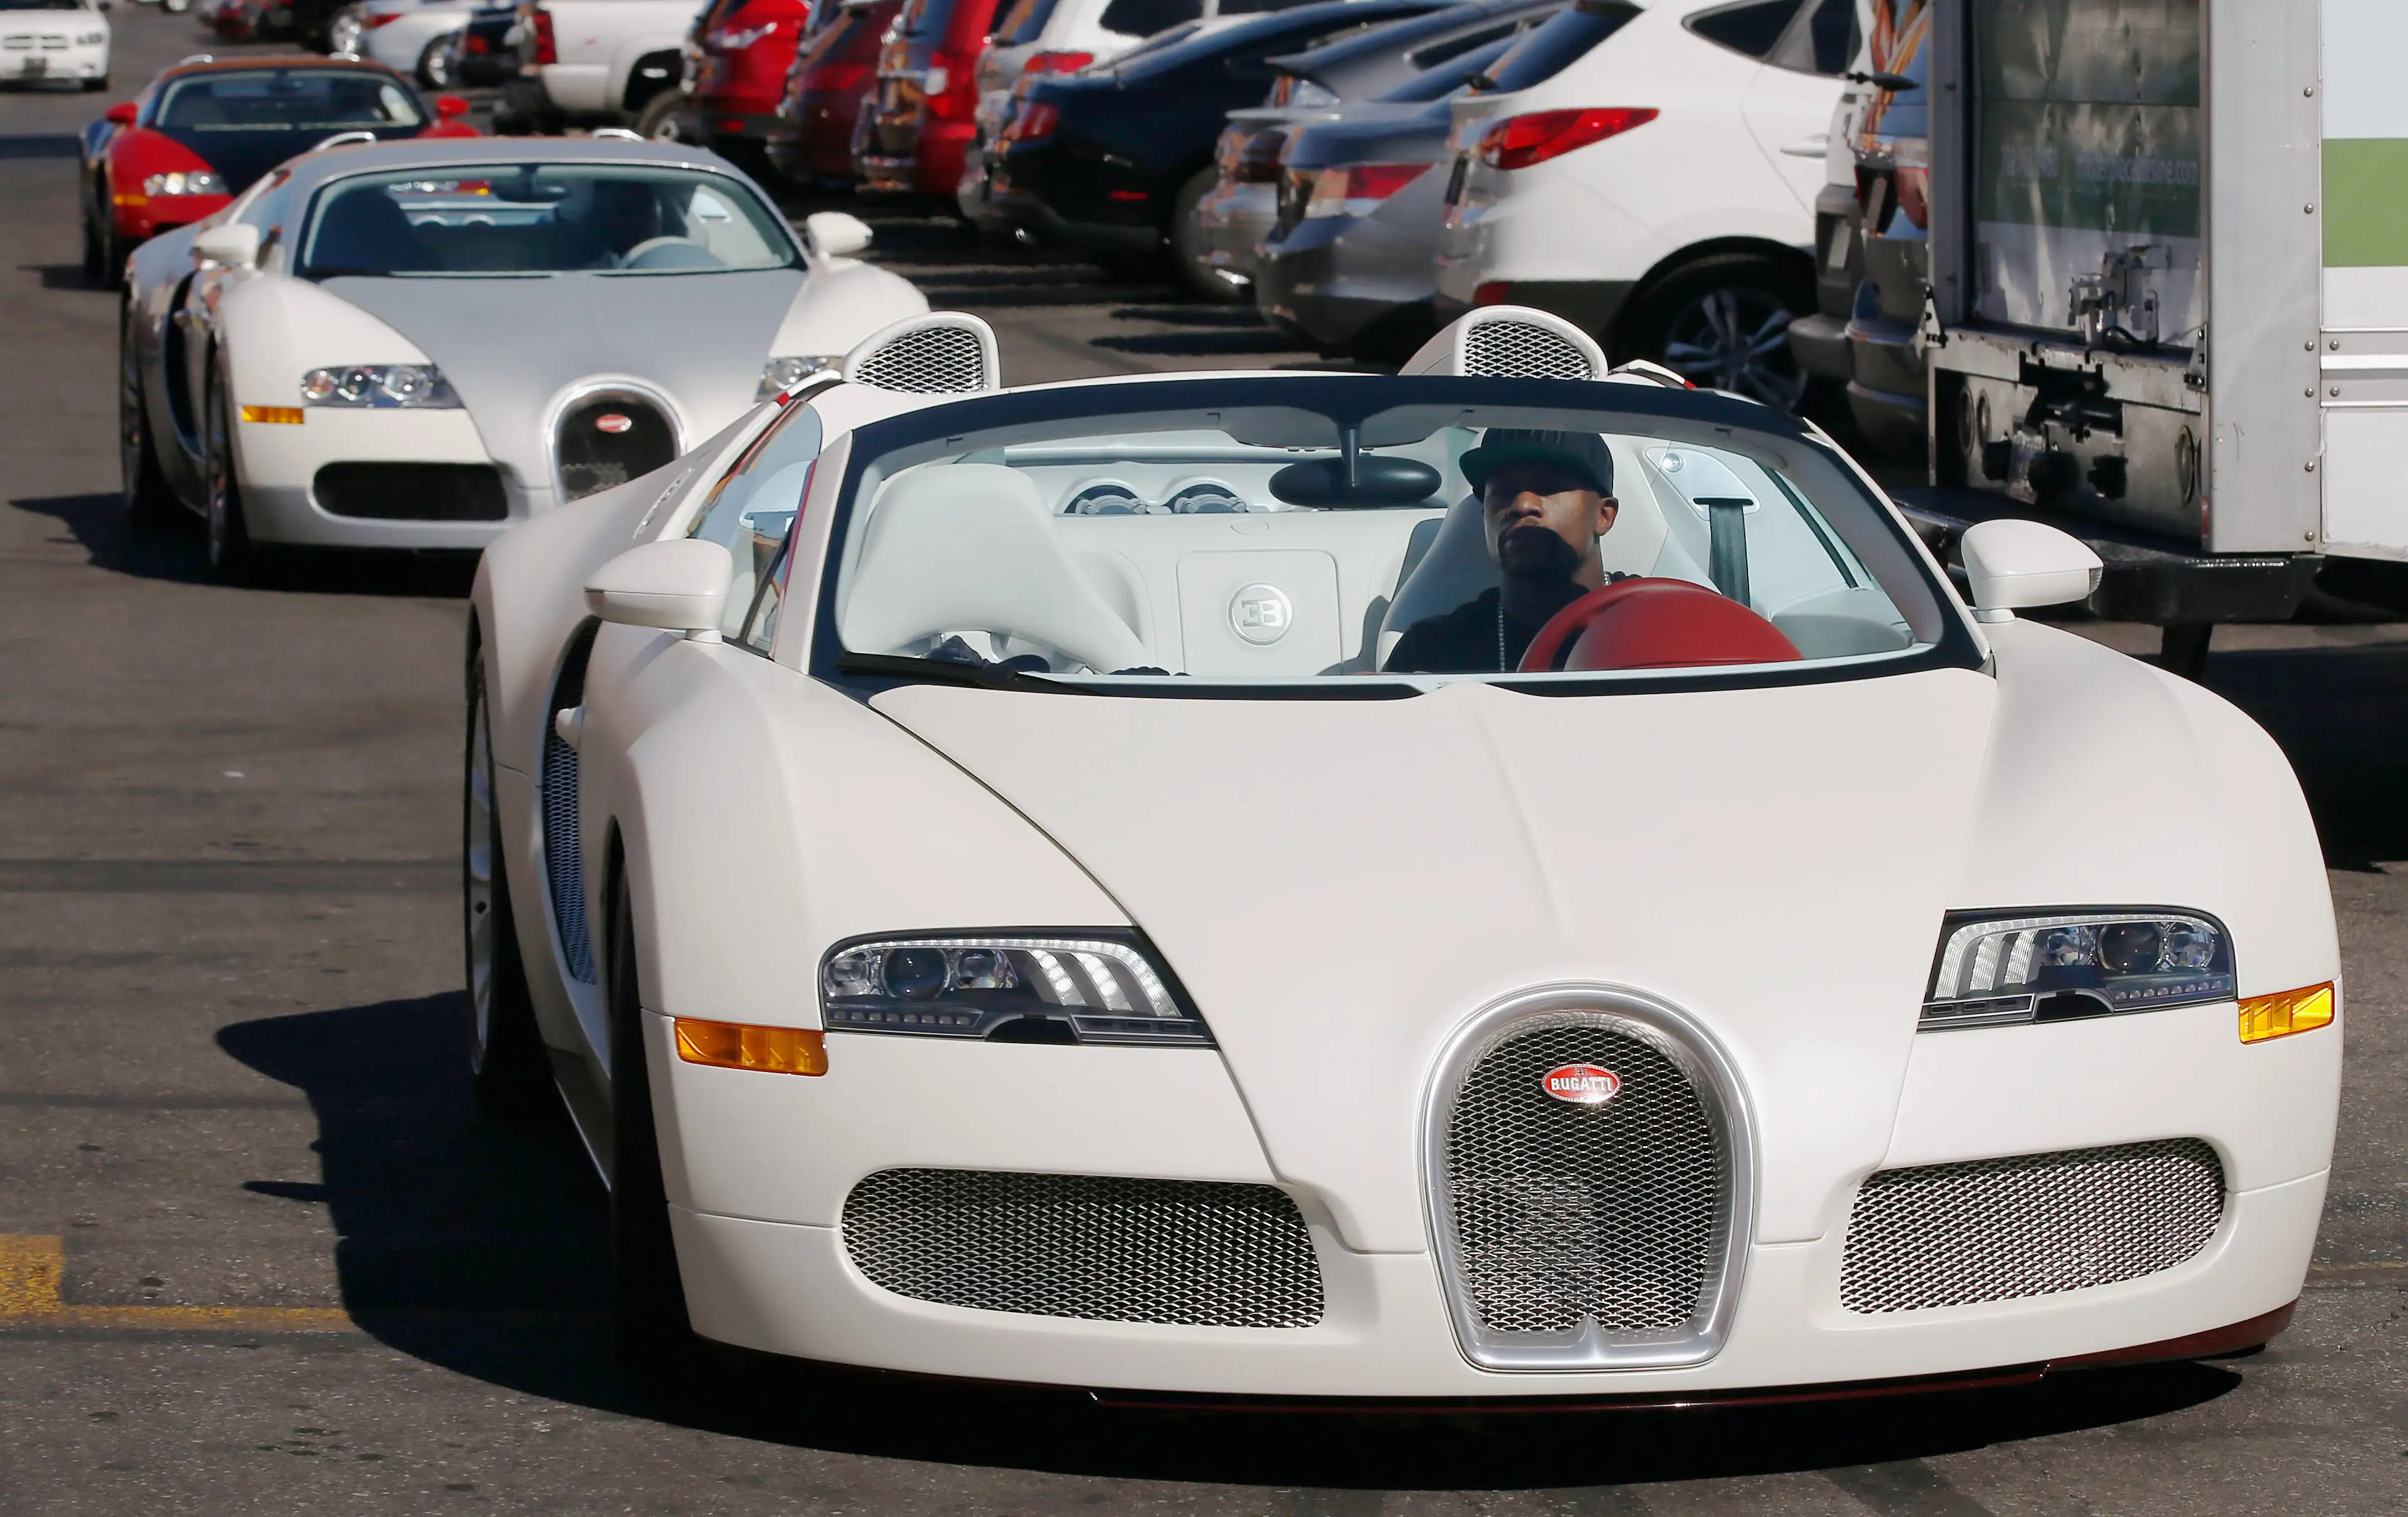 Boxer Floyd Mayweather Jr. (L) arrives in his Bugatti for a work out at the Mayweather Boxing Club on September 2, 2014 in Las Vegas, Nevada.